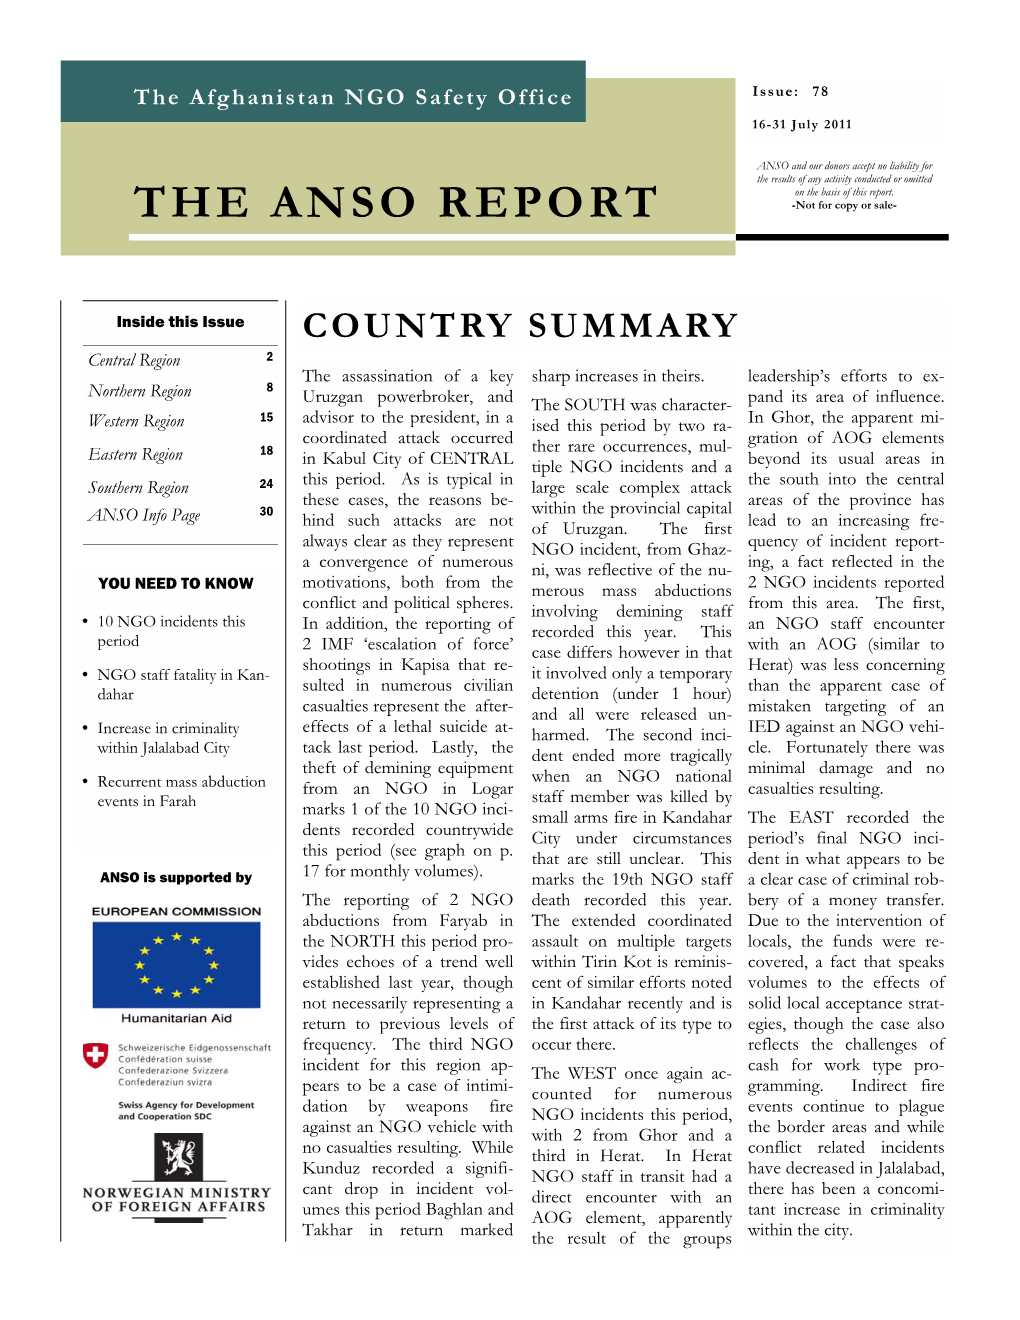 The ANSO Report (16-31 July 2011)